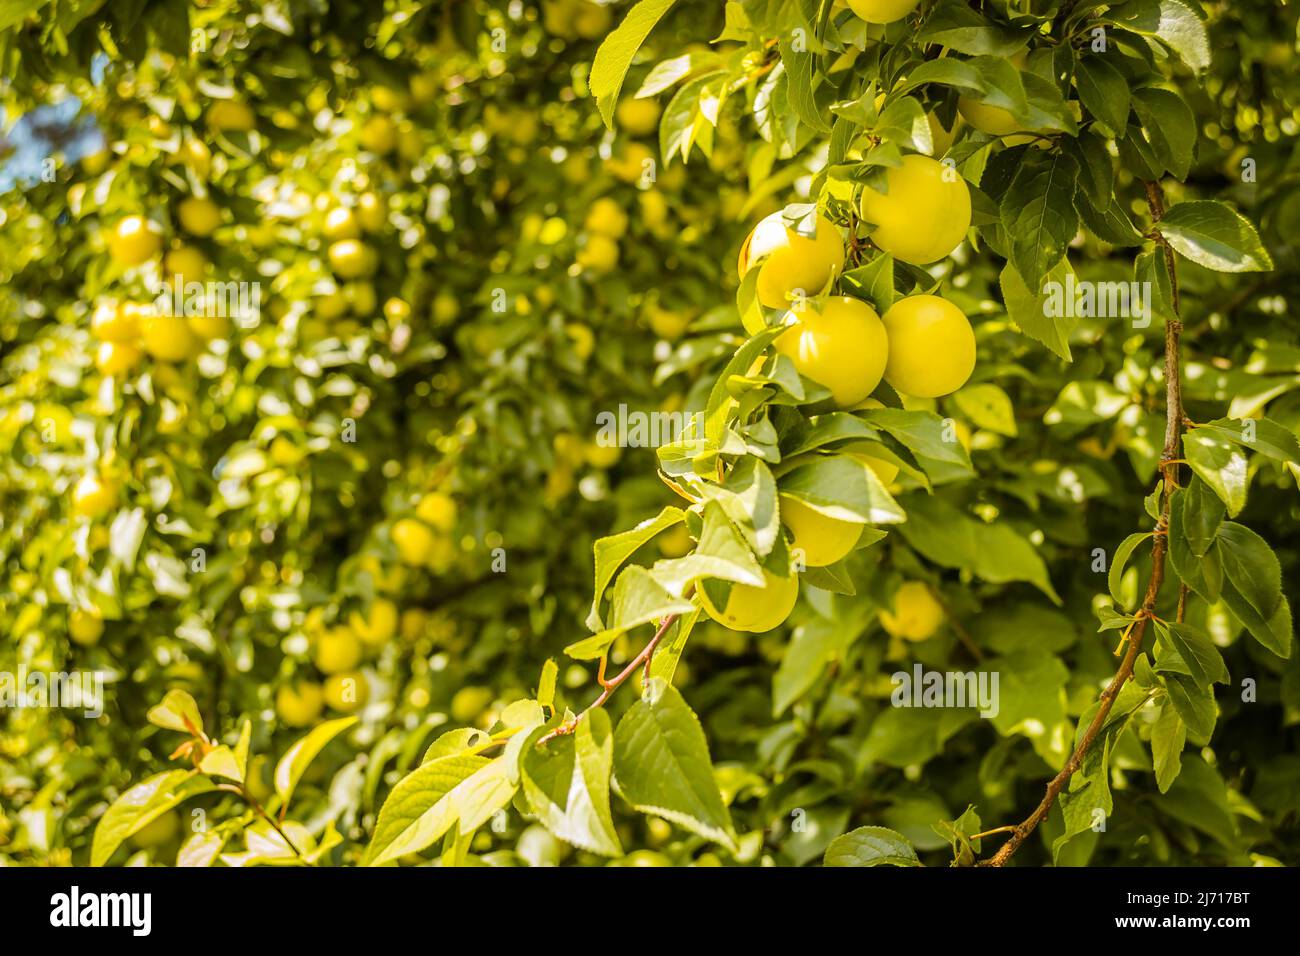 Beautiful fruits of yellow plums that grow in the canopy of green leaves, the plant grows in the garden in the sunlight, a photograph of nature. Stock Photo